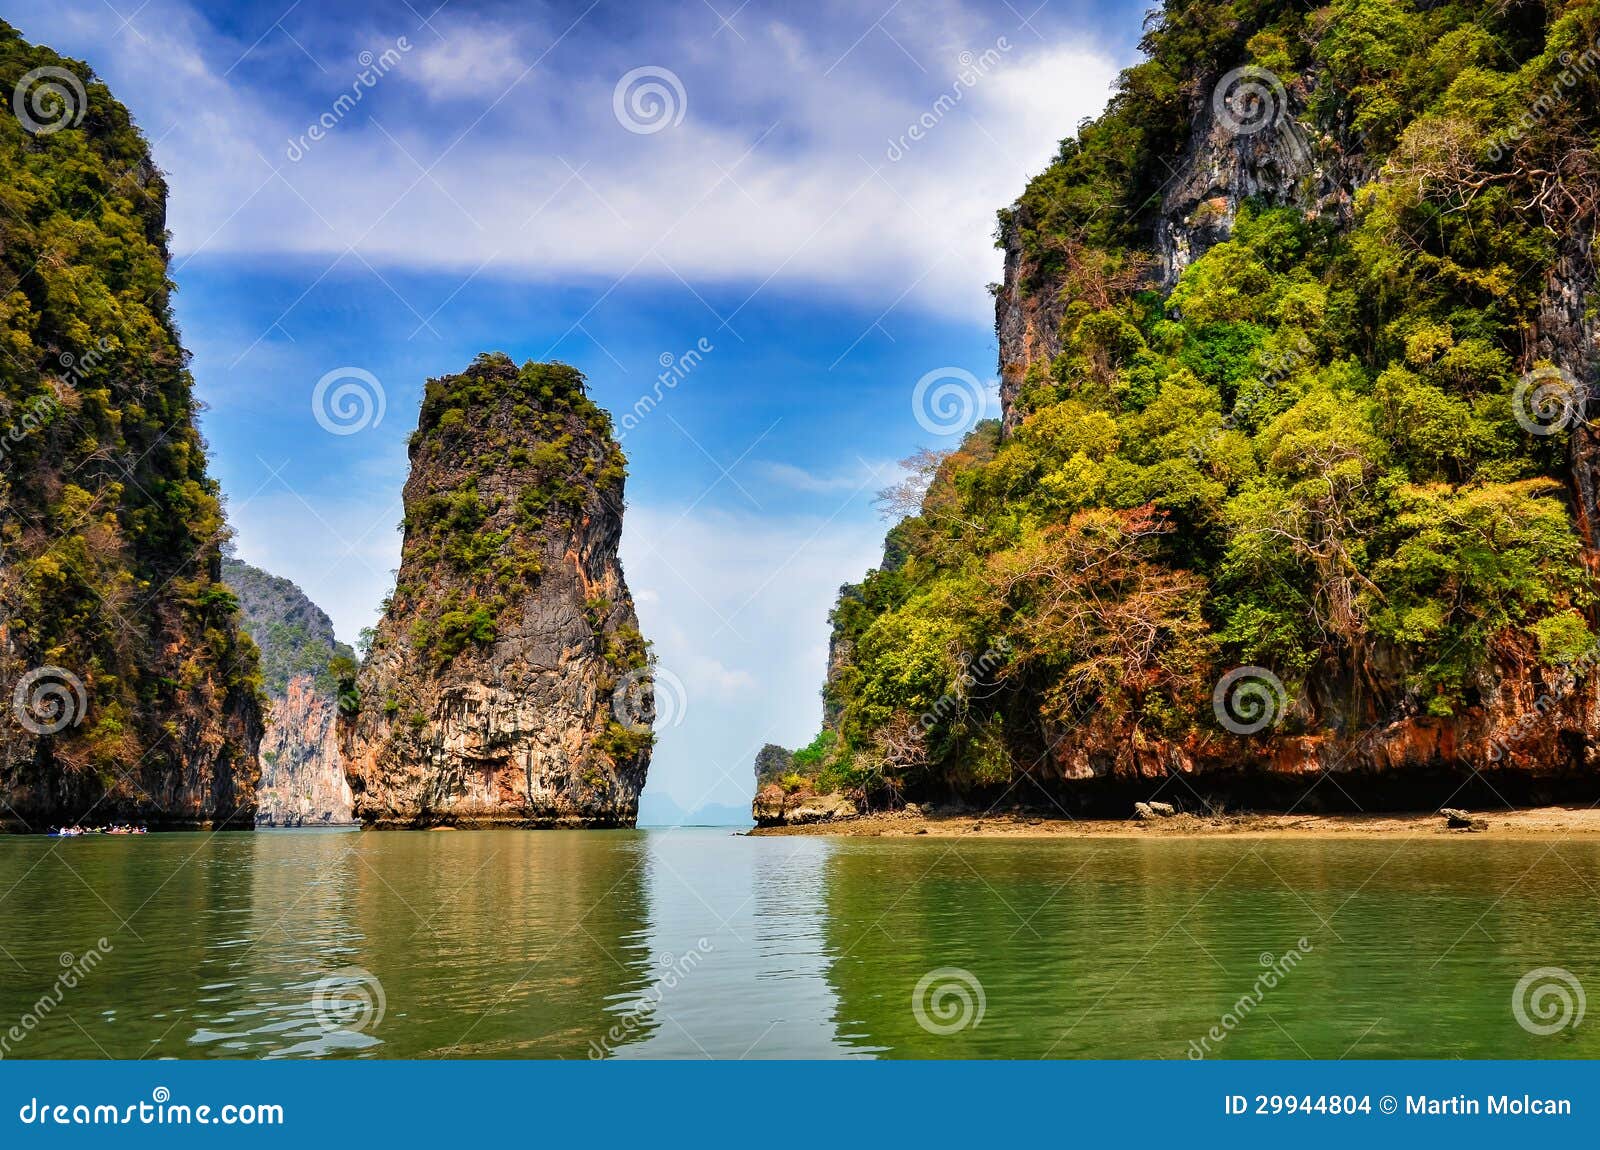 landscape view of phang nga bay islands and cliffs, thailand